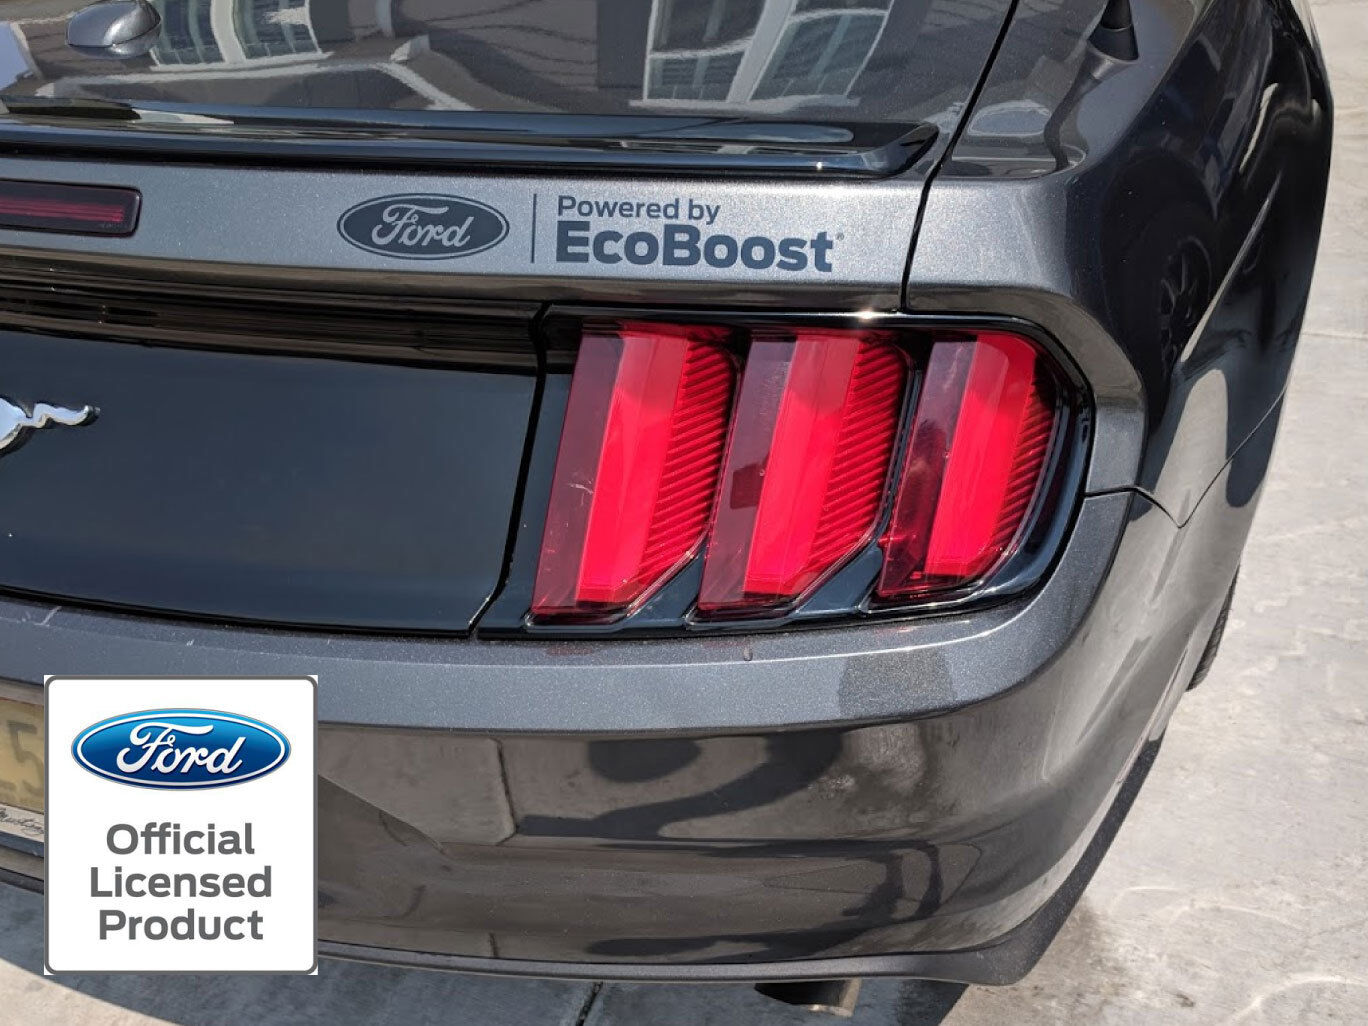 2018-2022 Ford Mustang Powered By Ecoboost Decal Vinyl Sticker Graphic Ea 2021